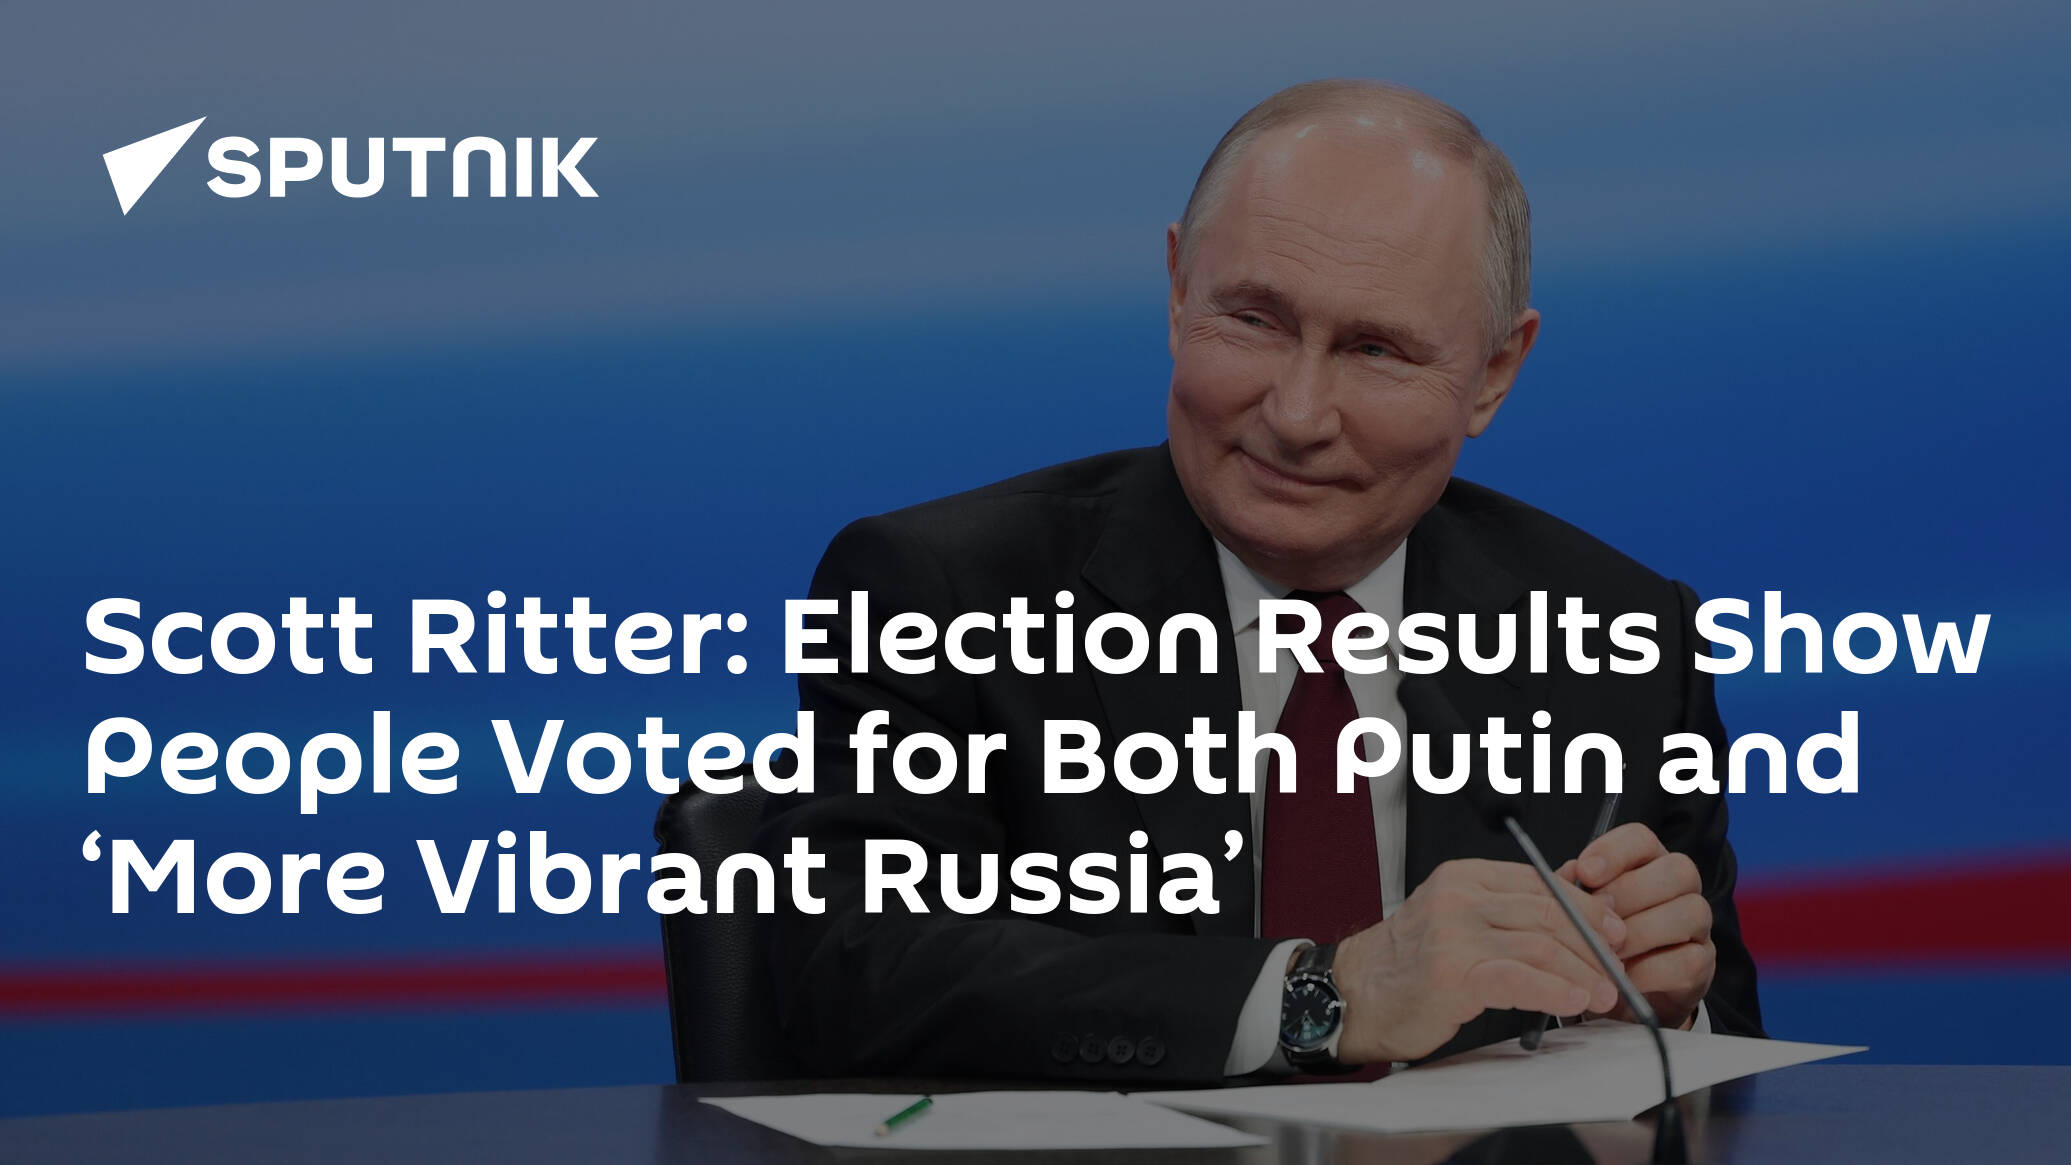 Scott Ritter: Election Results Show People Voted for Both Putin and ‘More Vibrant Russia’